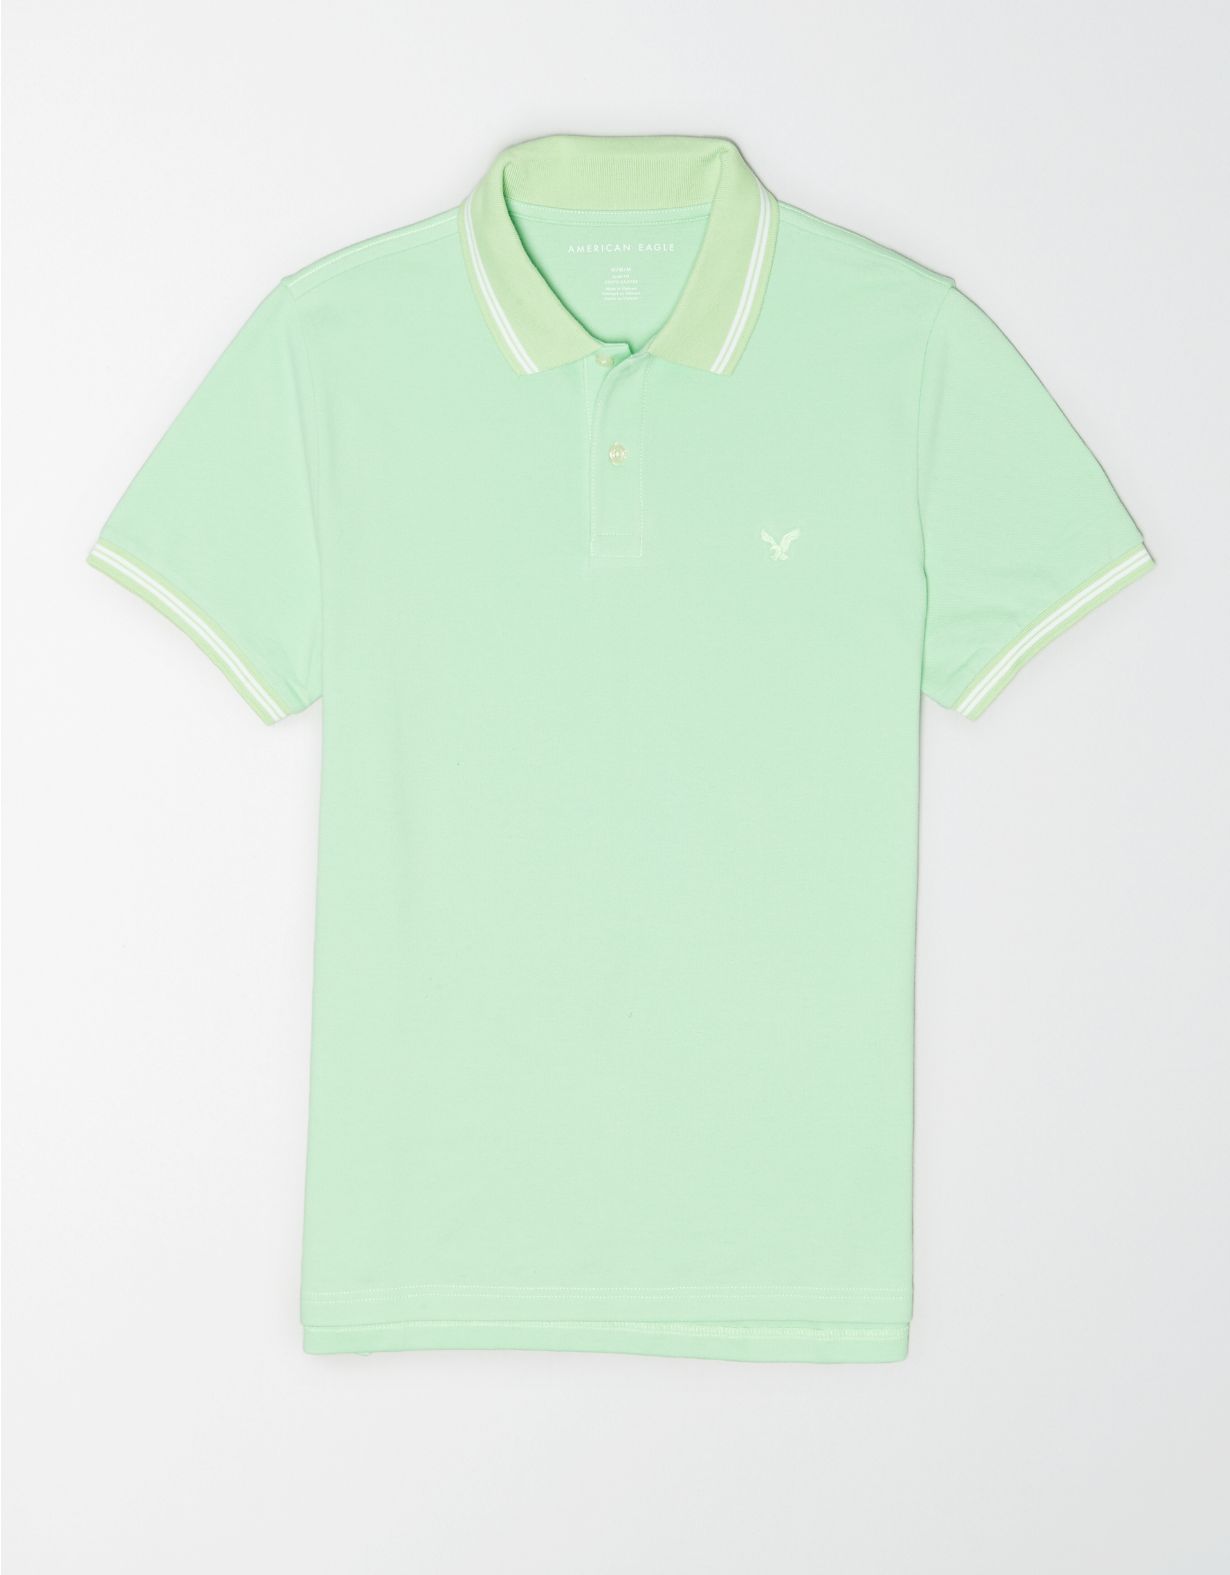 AE Slim Fit Tipped Pique Polo